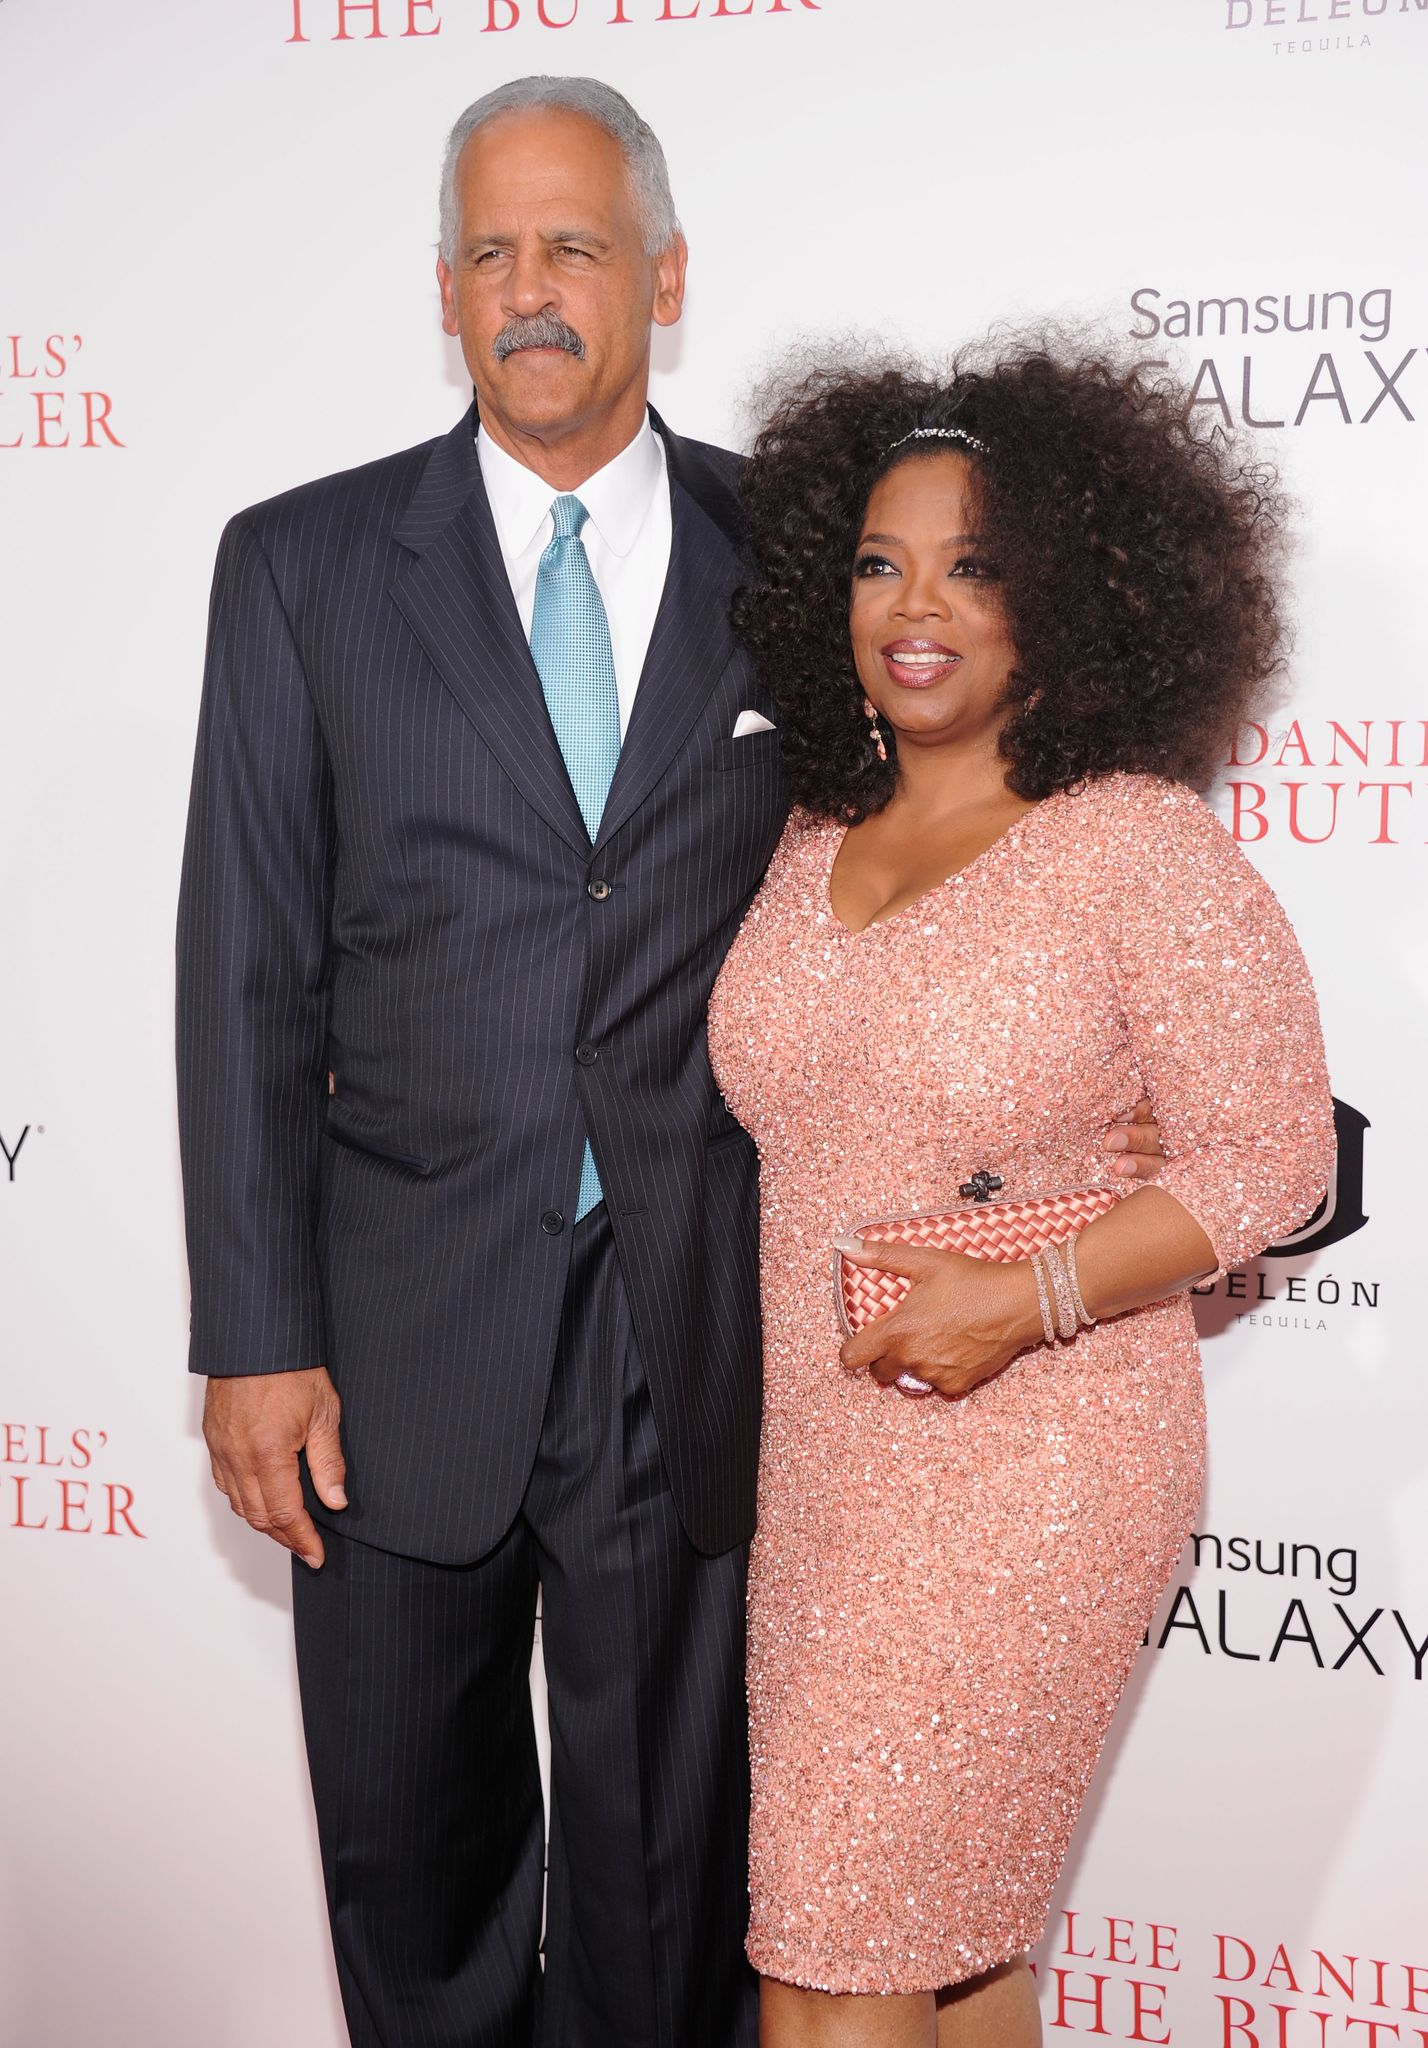 Stedman Graham and Oprah Winfrey arrive on the red carpet for the premiere of  "The Butler" on August 5, 2013 | Photo: Getty Images